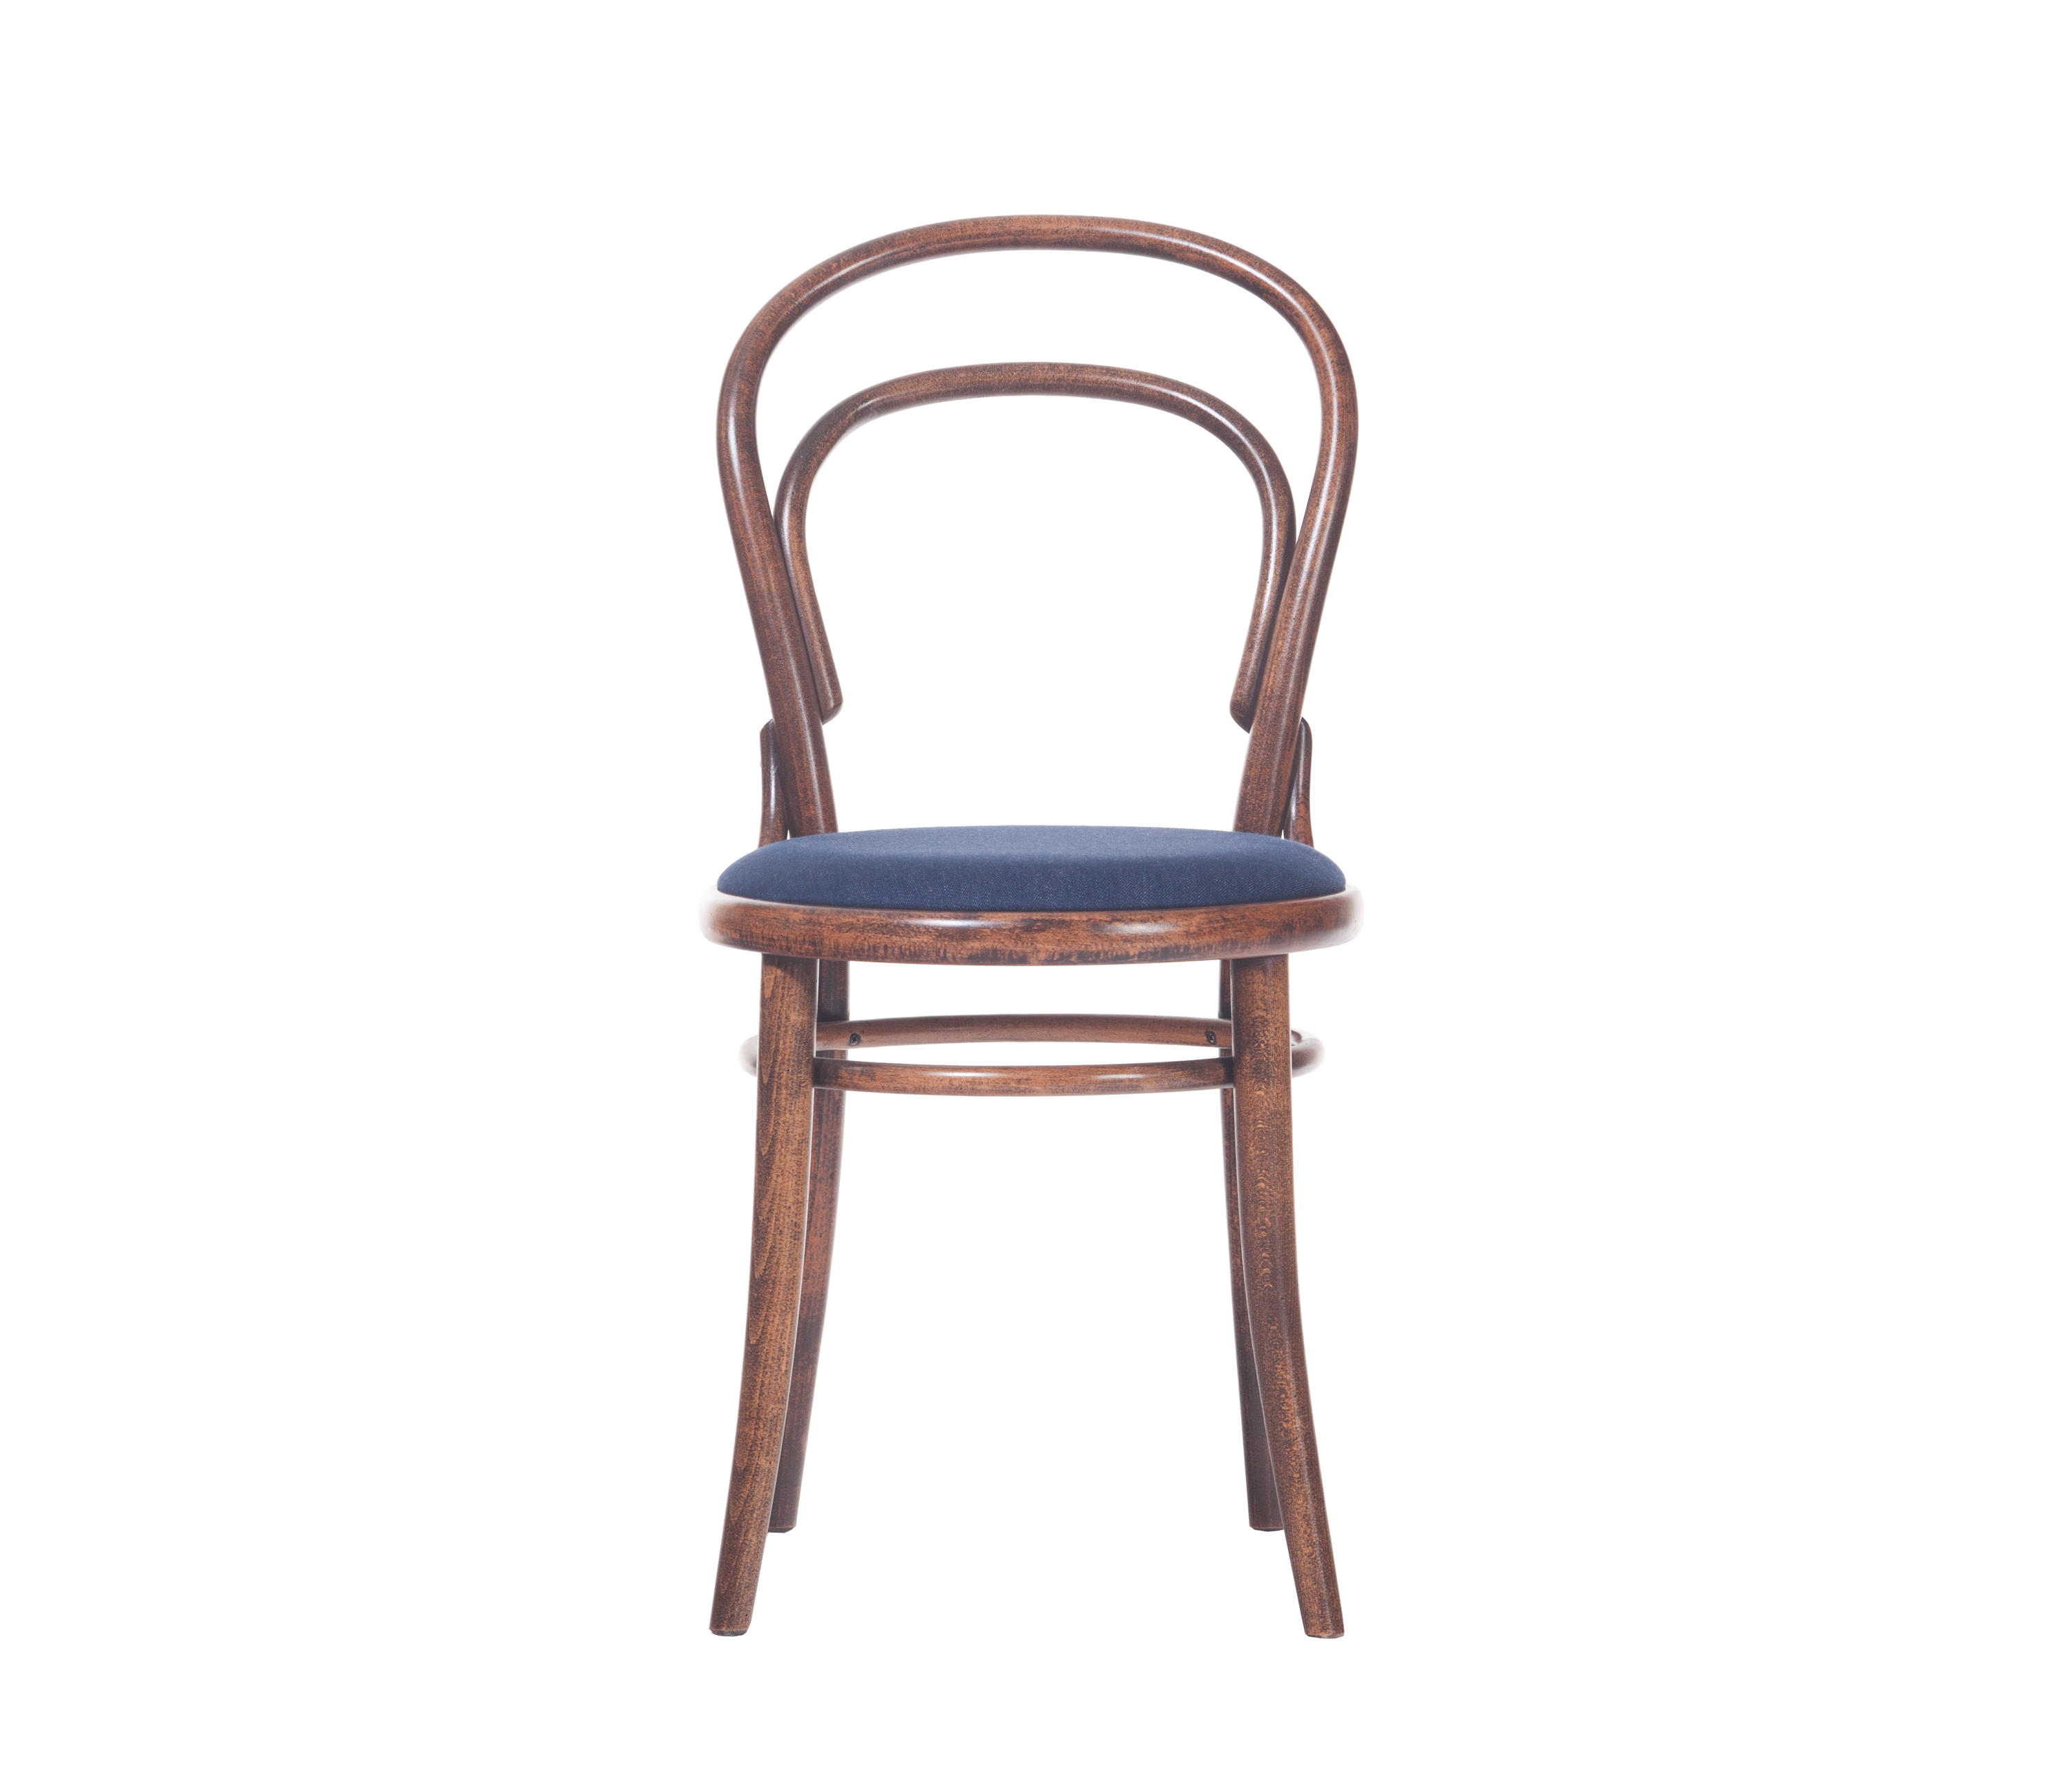 14 CHAIR - Chairs from TON | Architonic